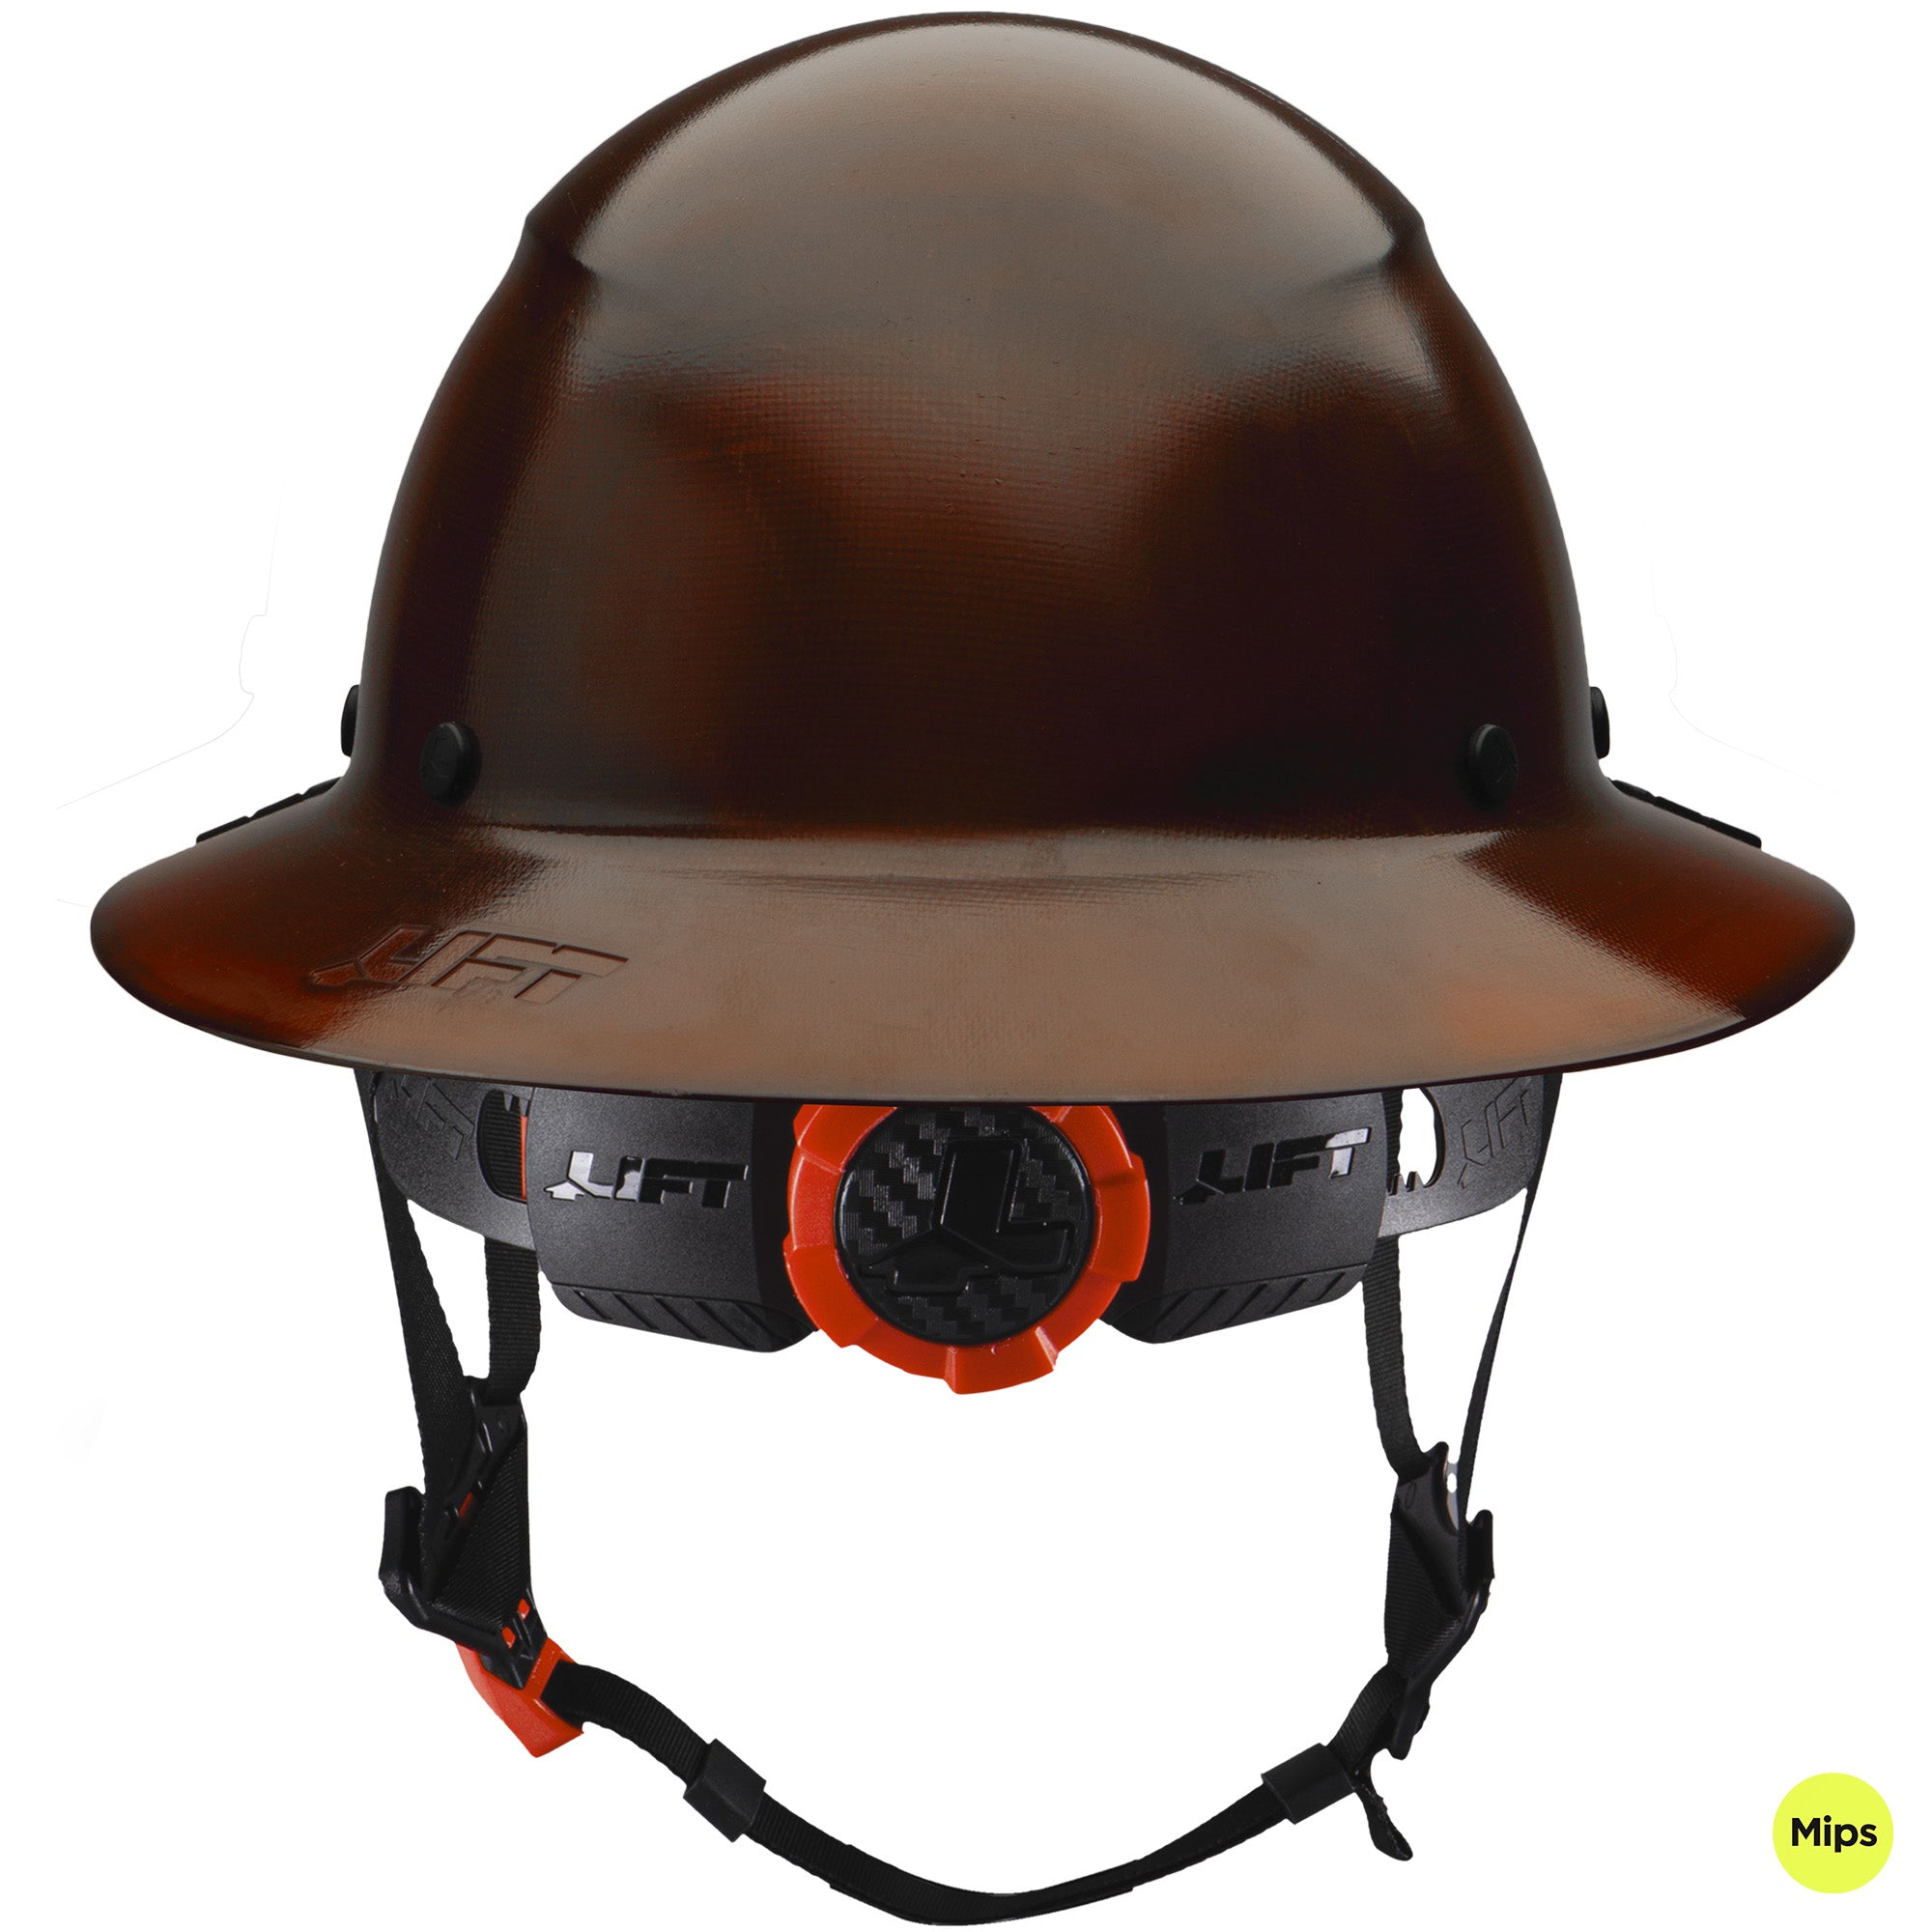 DAX Full Brim Hard Hat with Mips - Natural - LIFT Safety